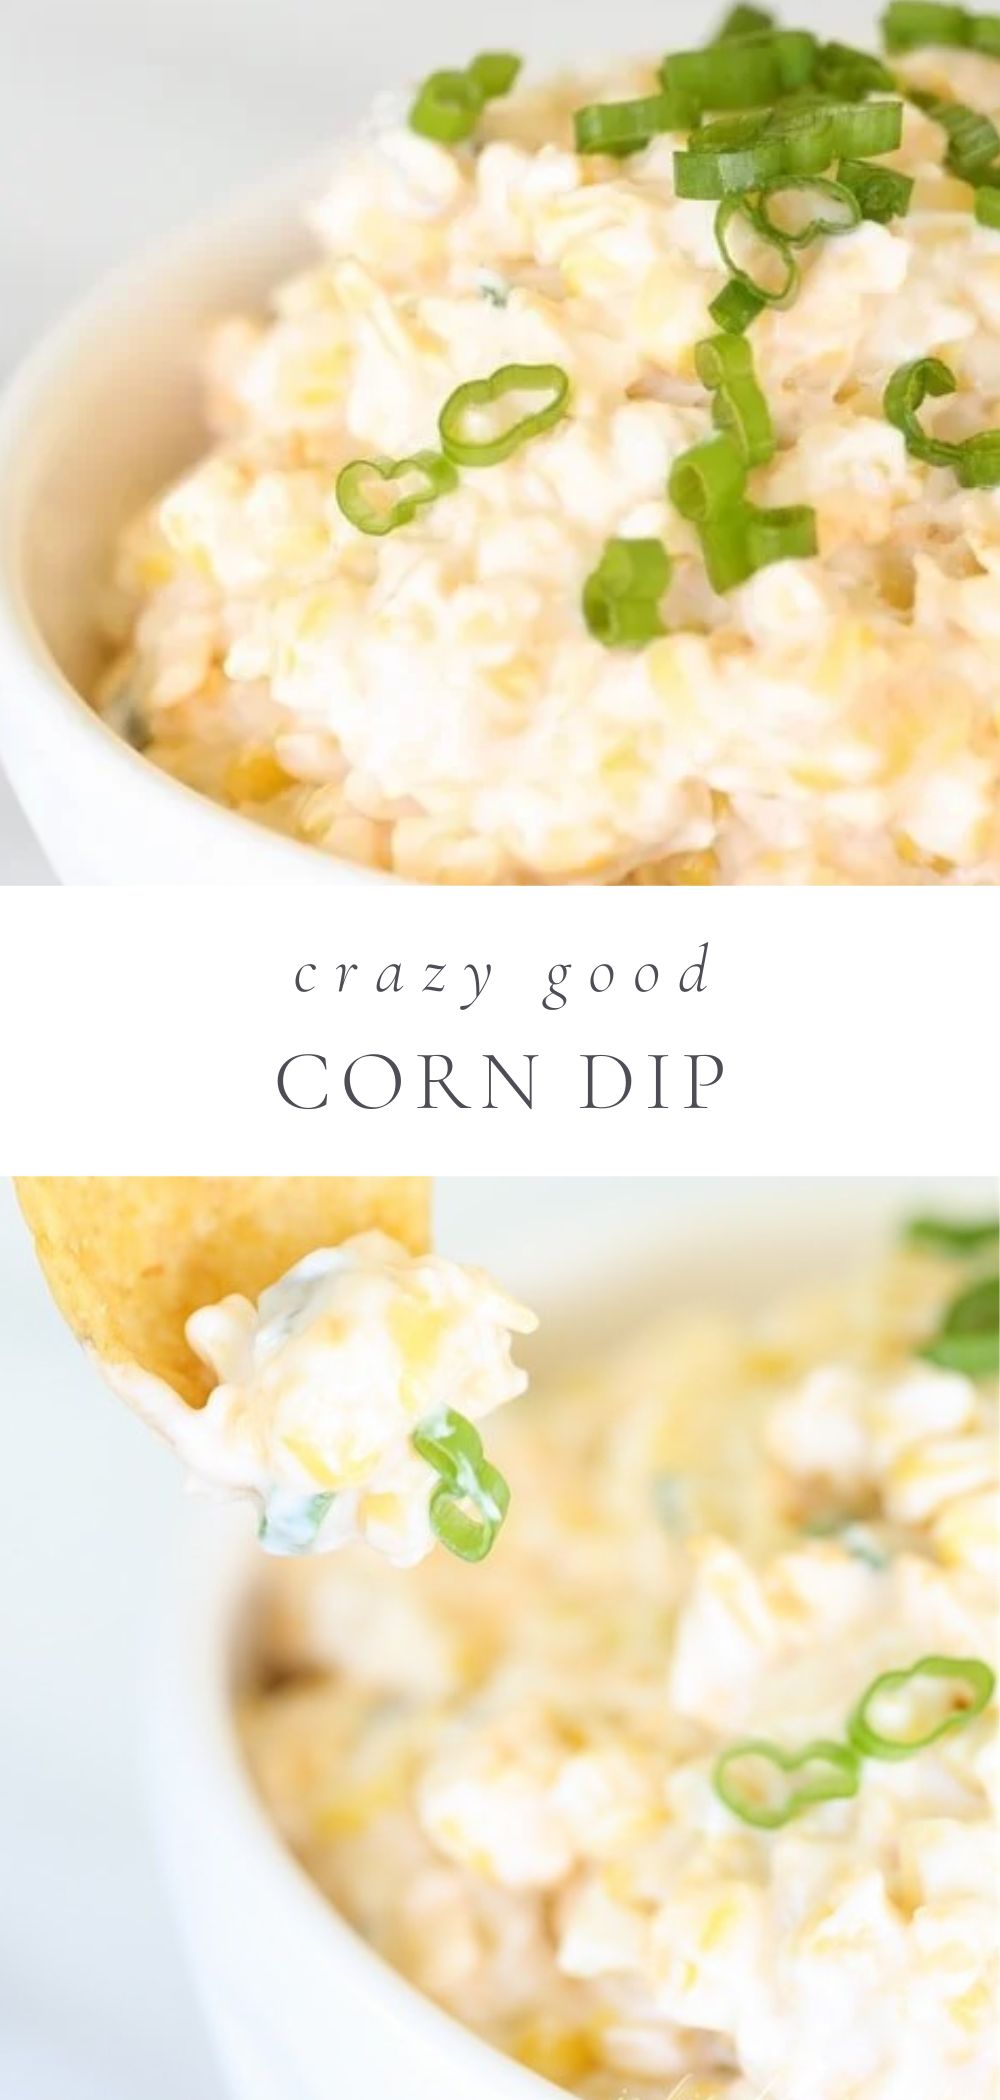 2 pictures of corn dip with text between them